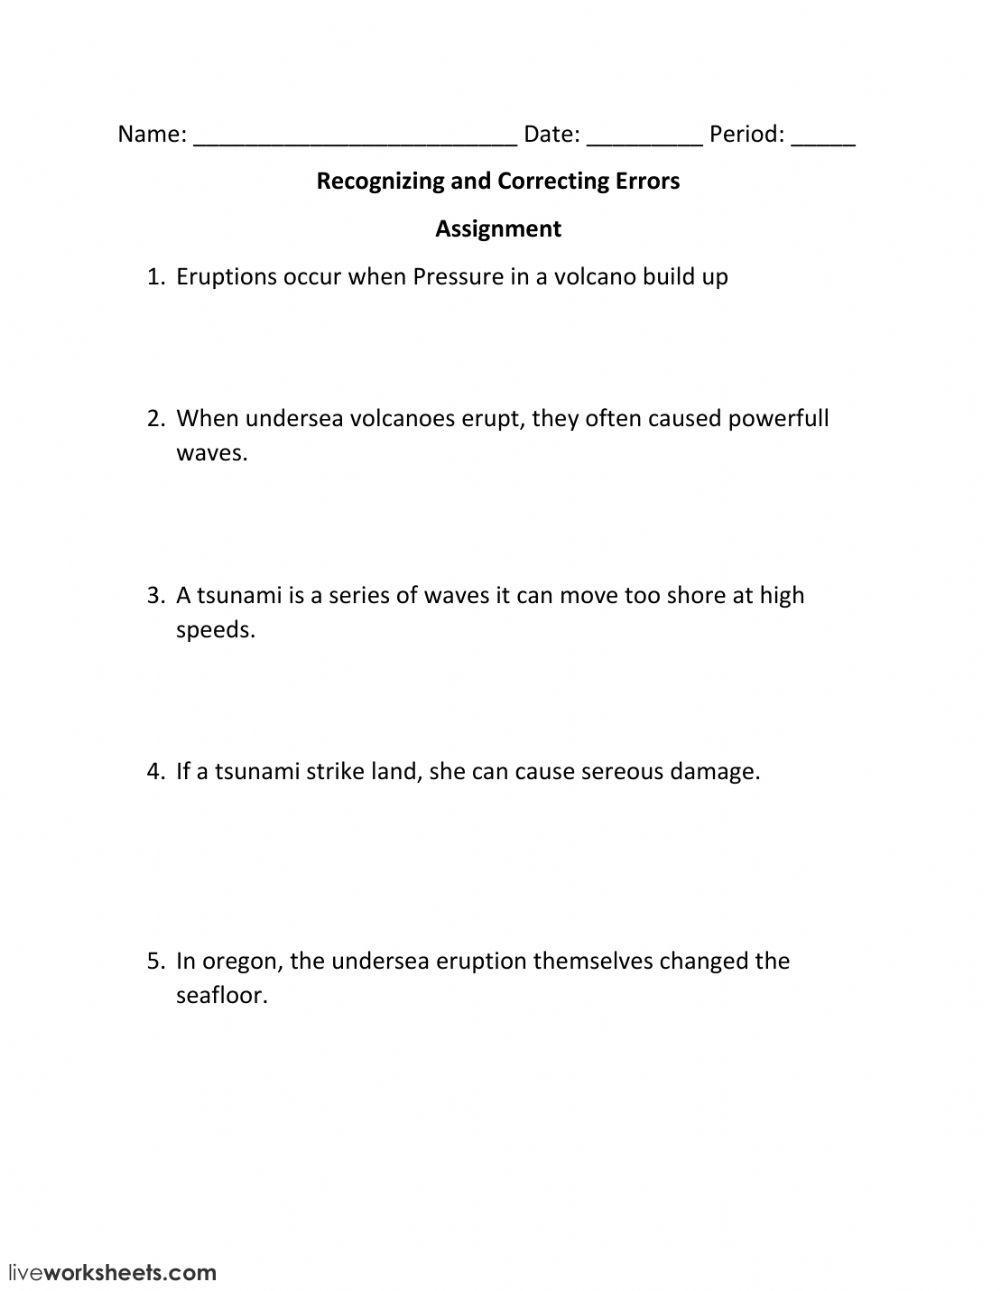 Lesson 7 - Recognizing and Correcting Errors